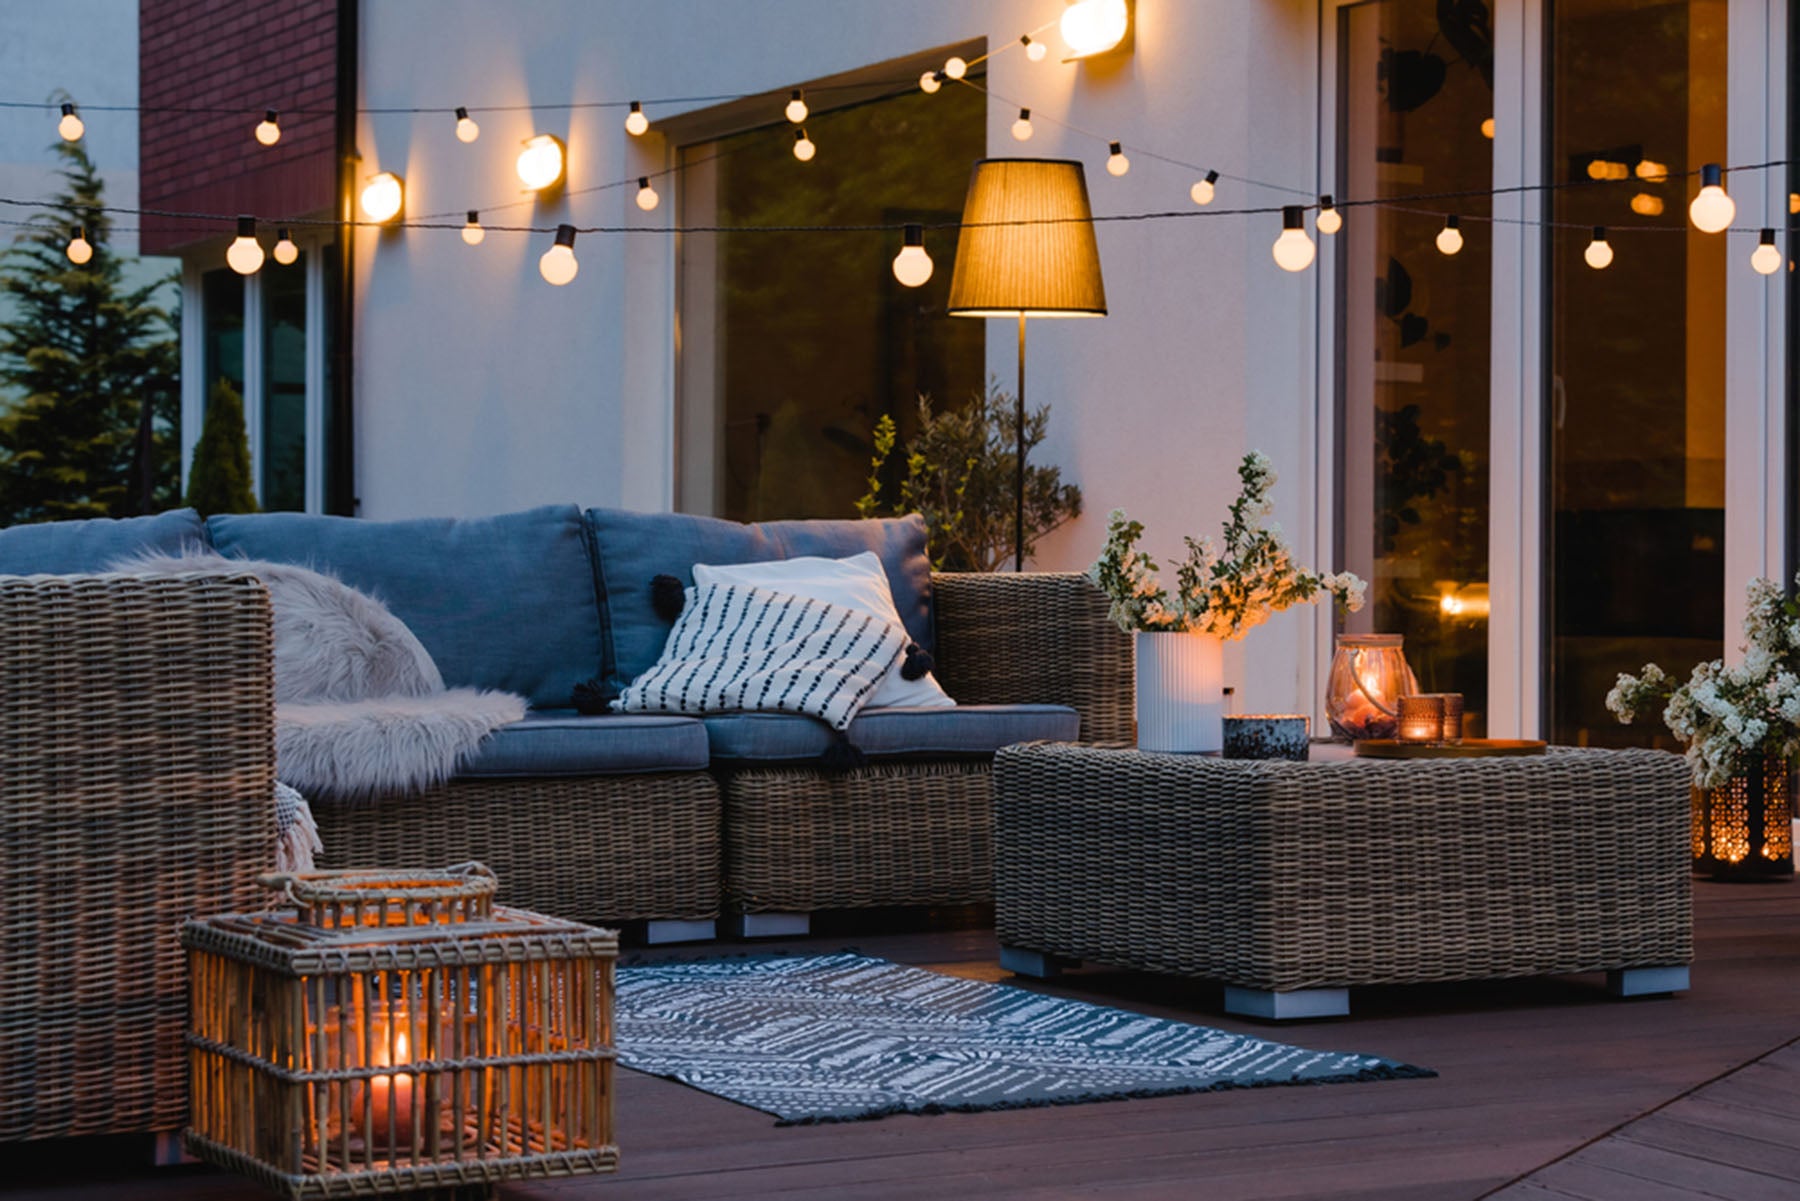 Learn how to keep patio cool in summer